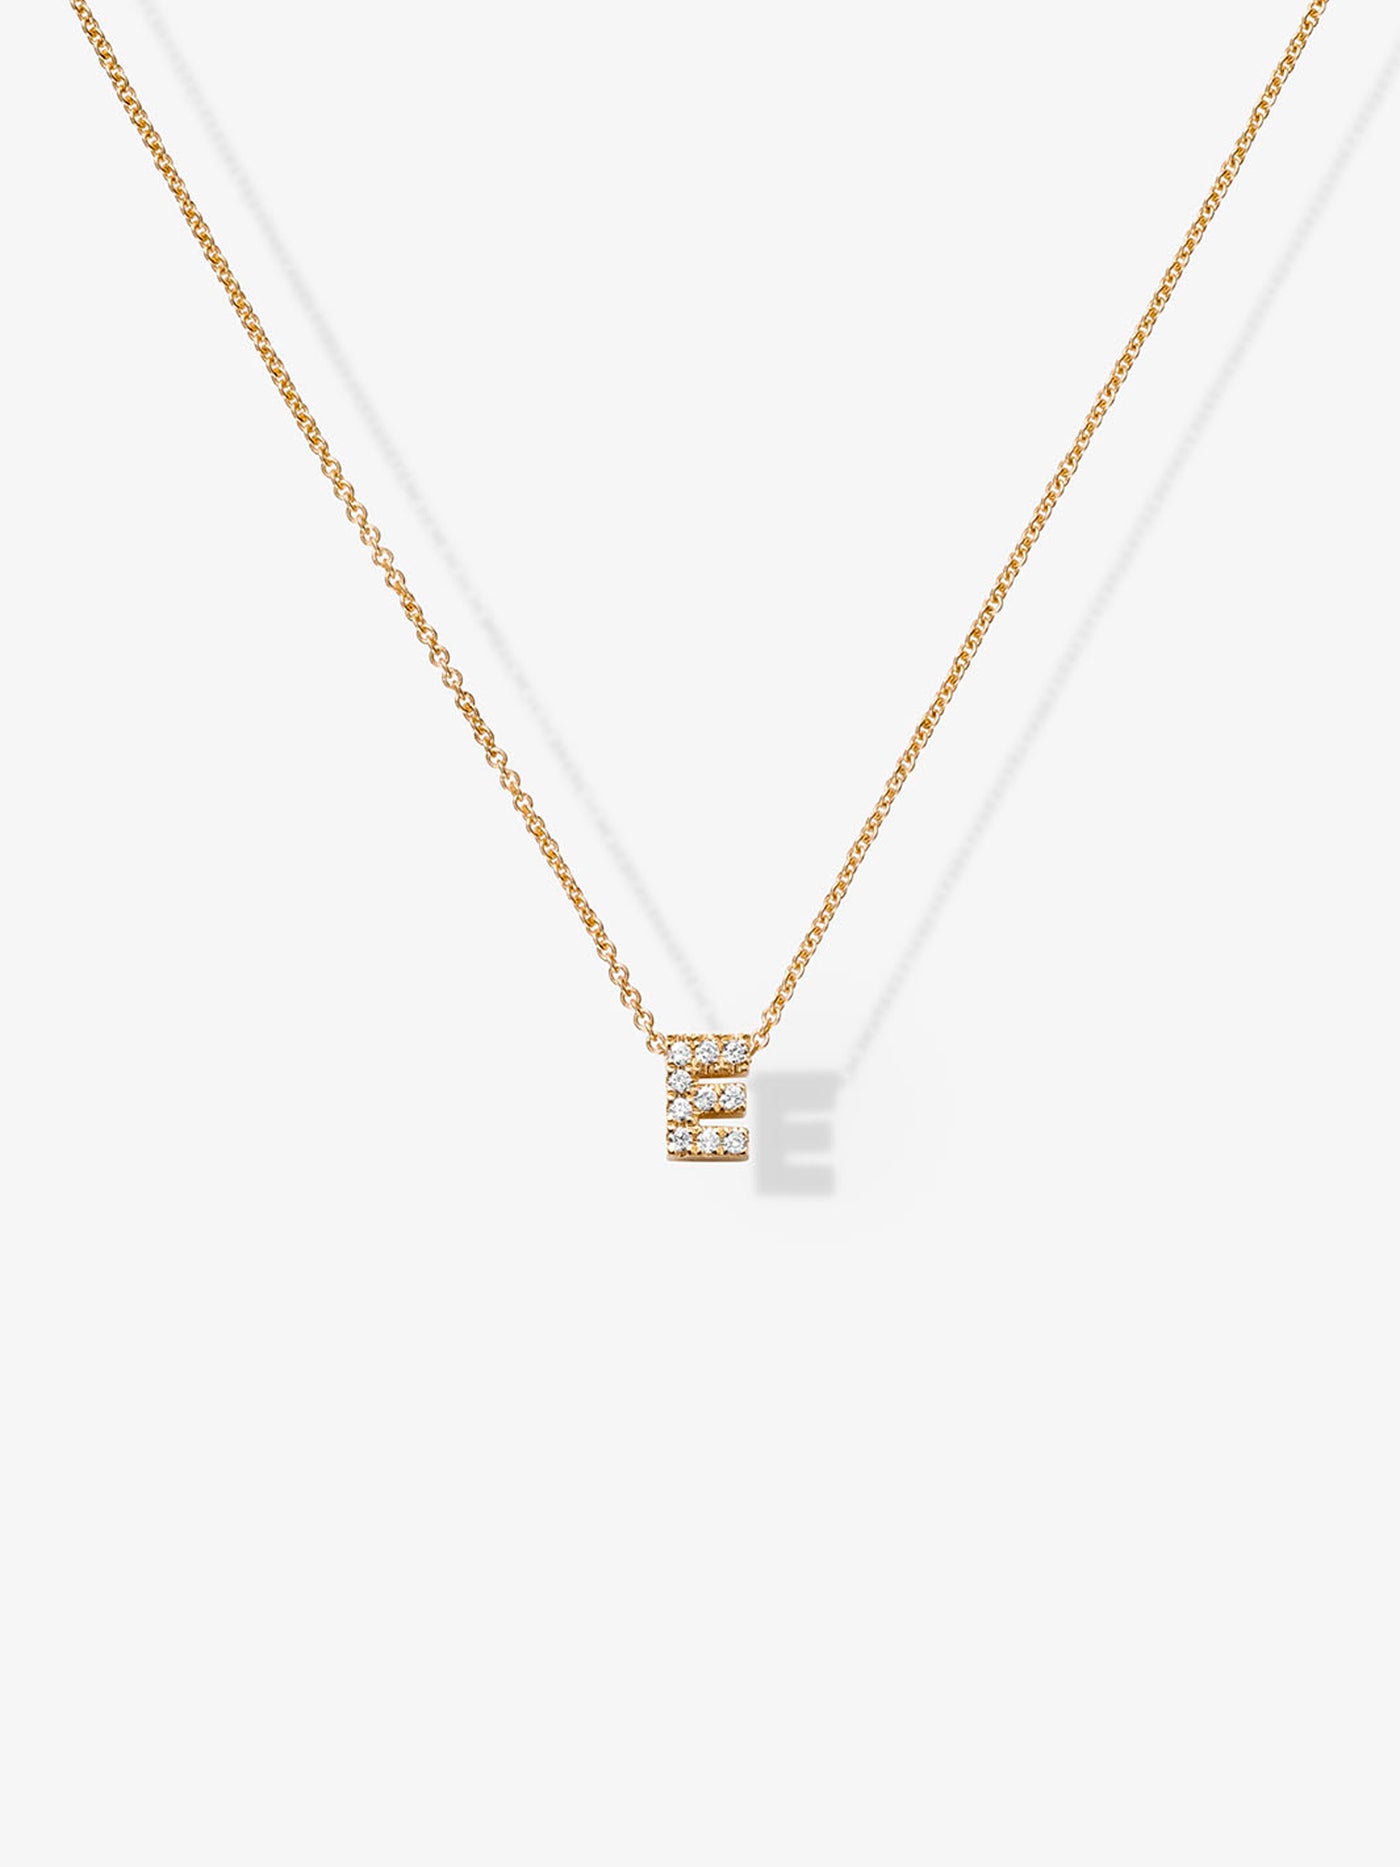 Letter E Necklace in Diamonds and 18k Gold